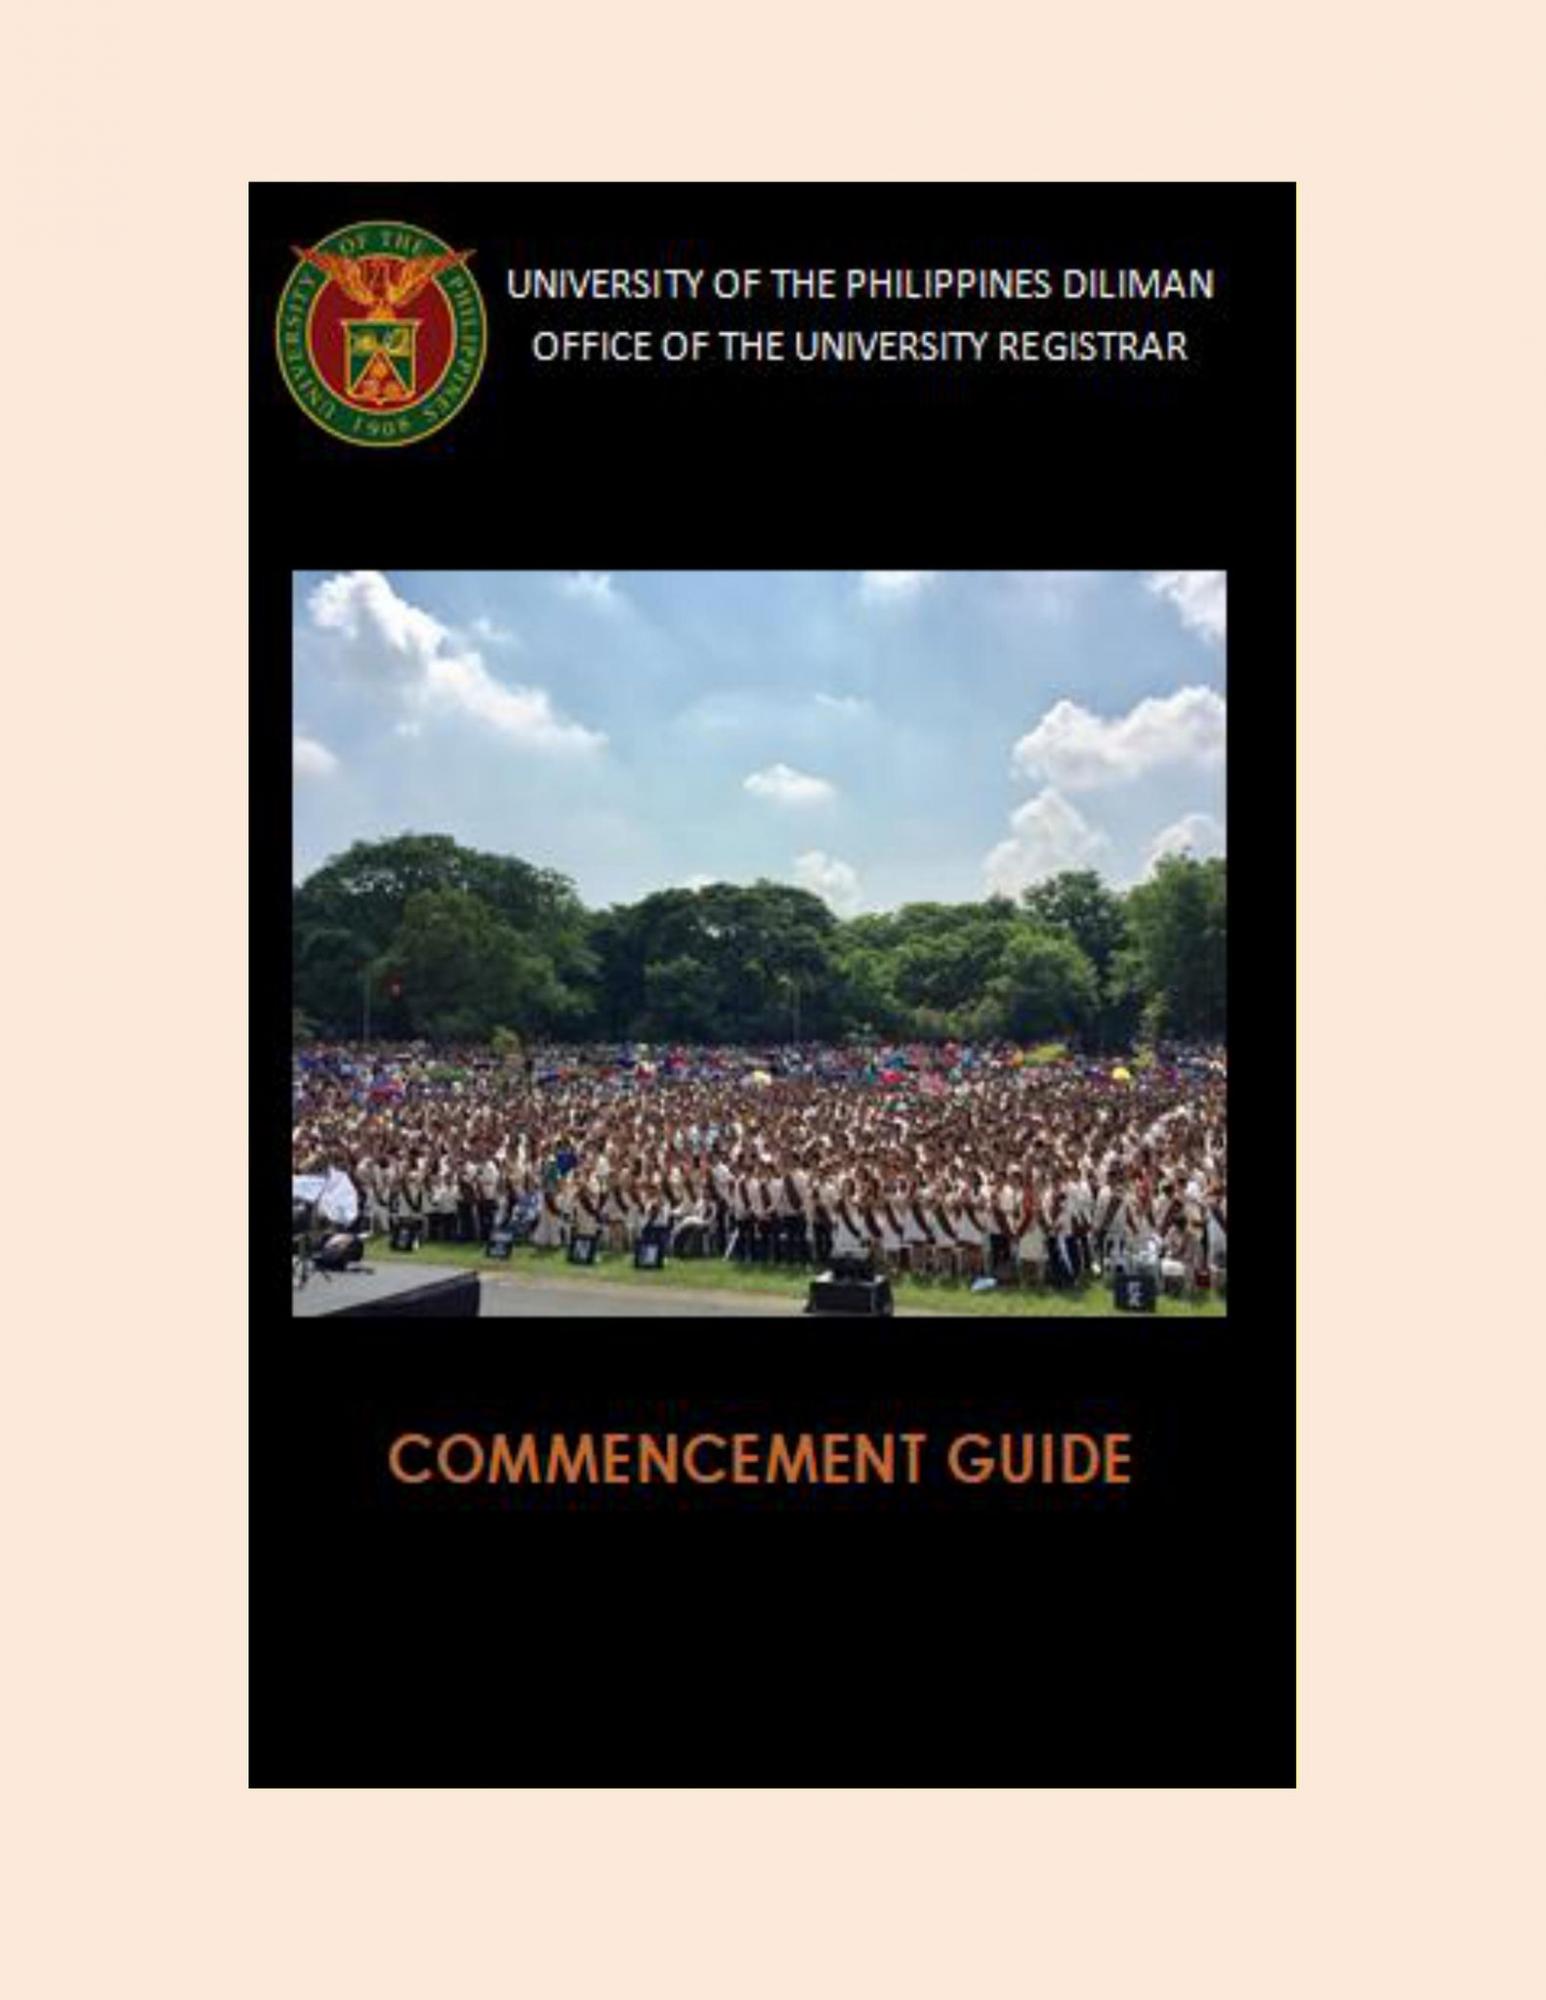 The UP Diliman Office of the University Registrar released the guidelines for the 2022 General Commencement Exercises on July 31, Sunday, at 7 a.m.